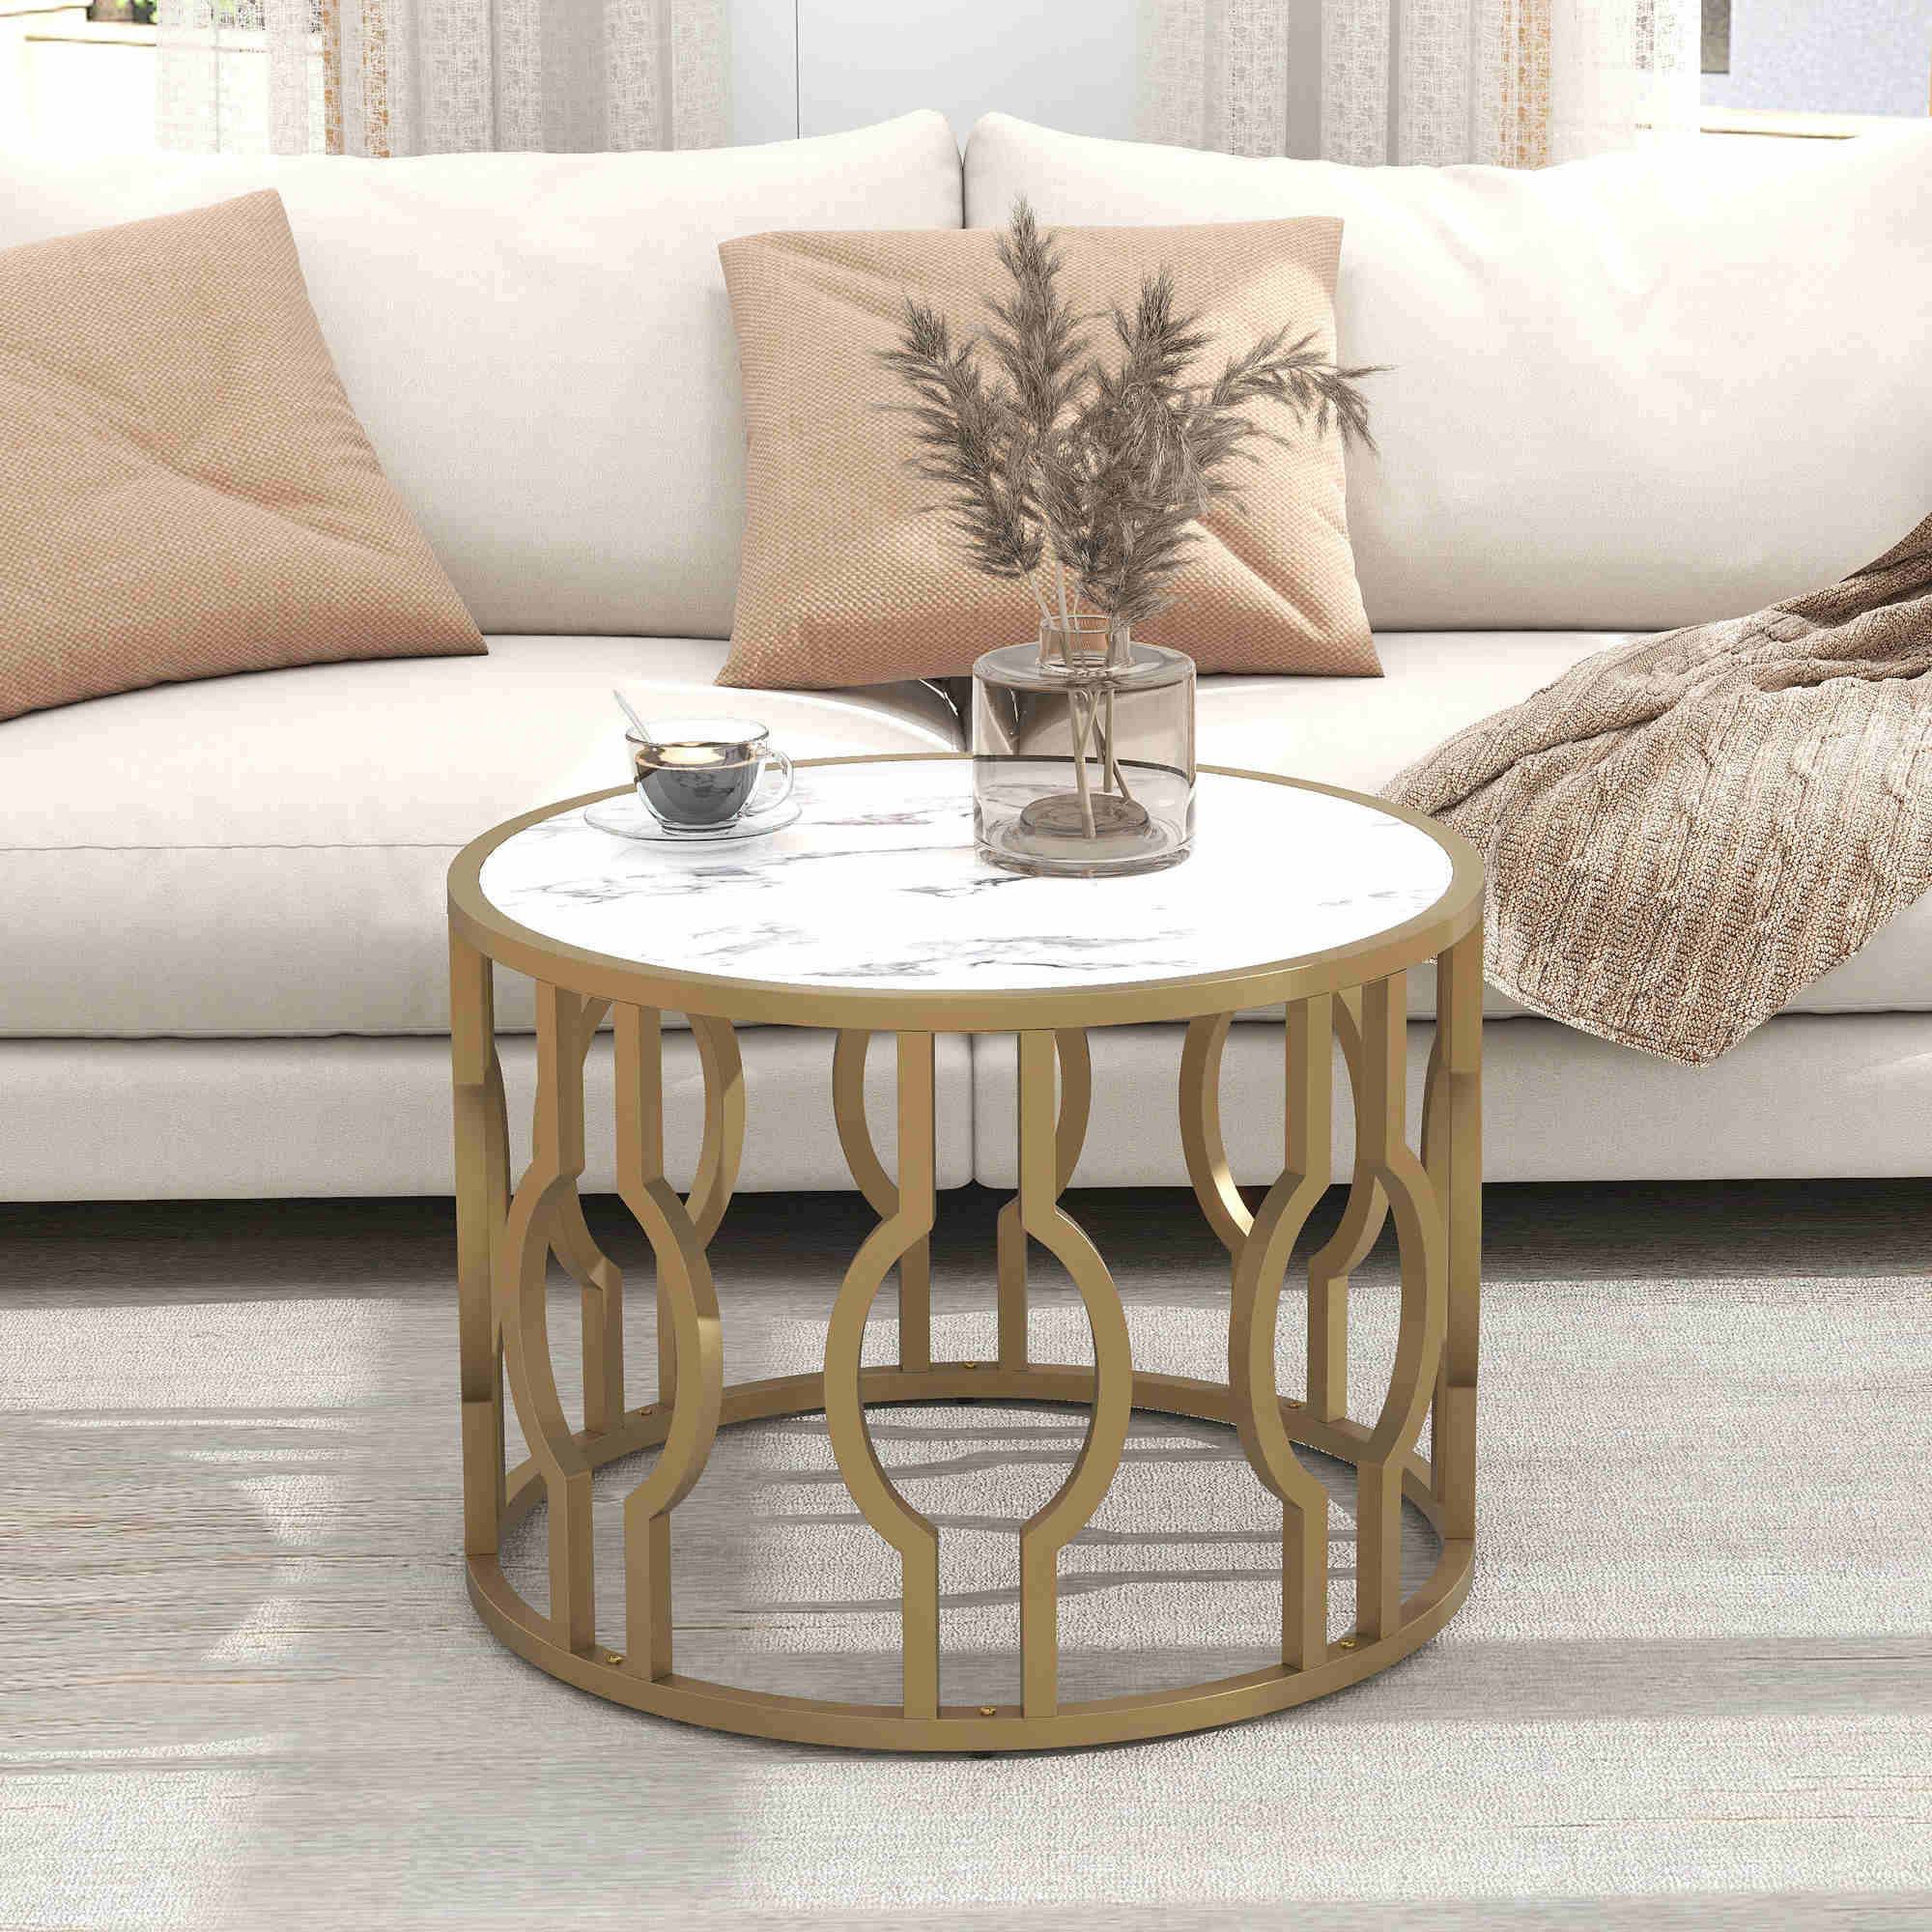 Table basse blanche ronde